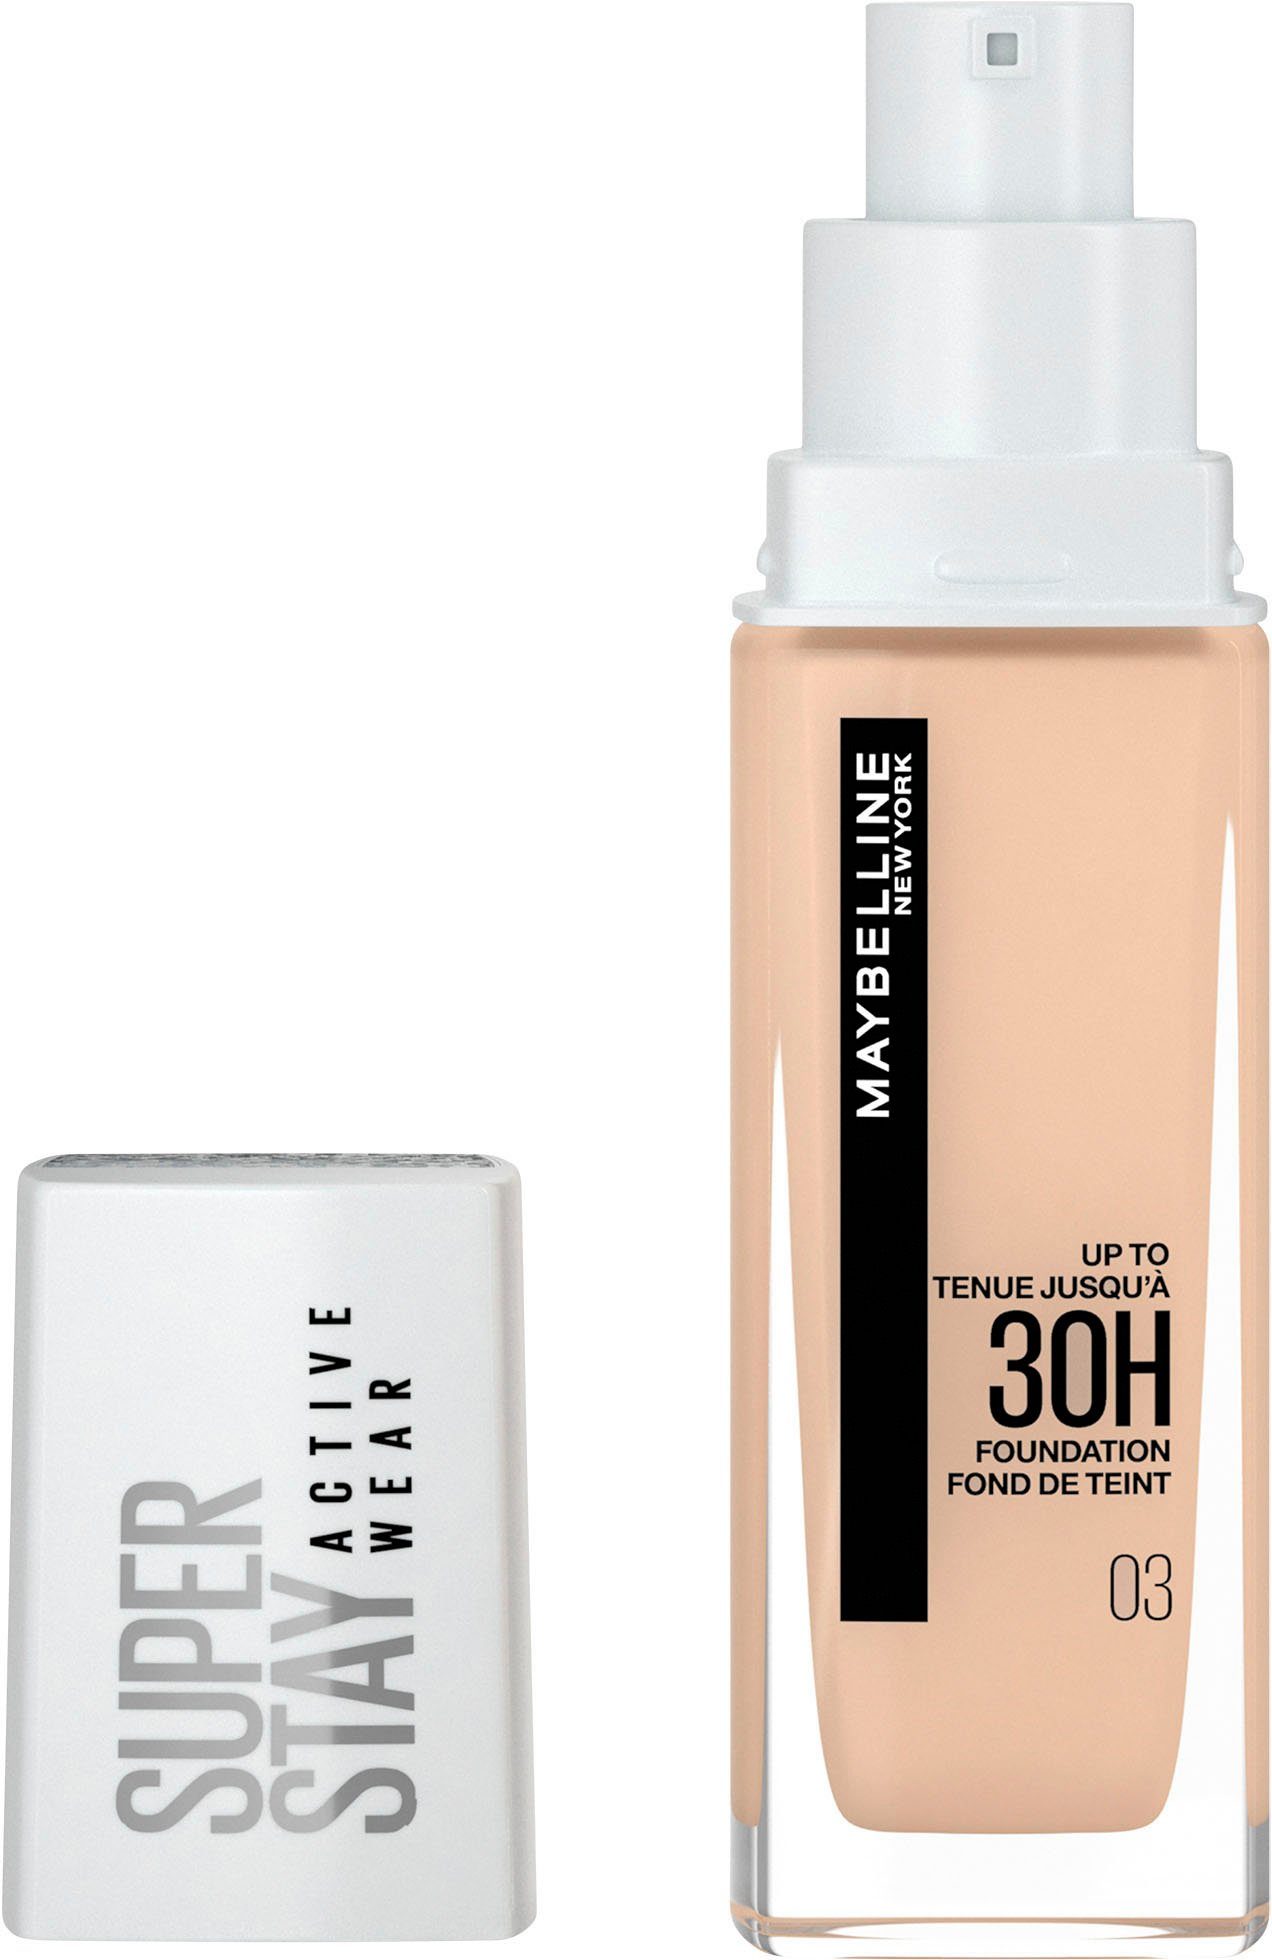 True YORK Active Wear 3 Foundation NEW Ivory Super Stay MAYBELLINE